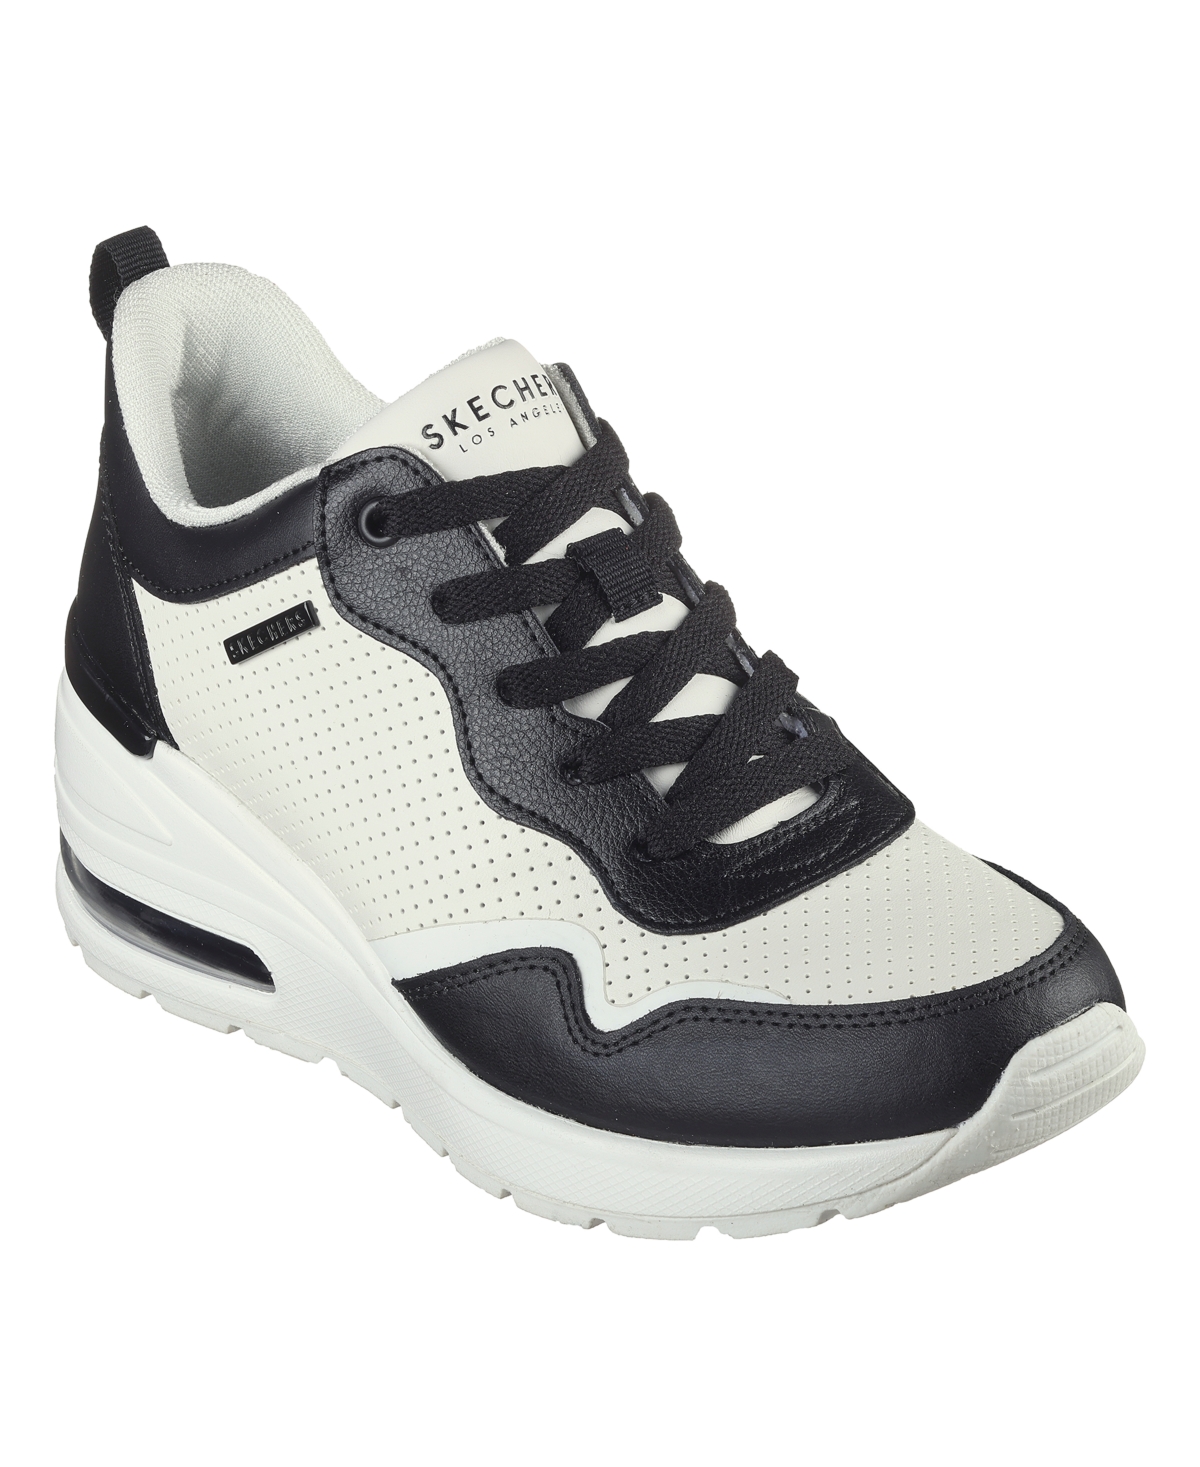 Women's Street Million Air - Hotter Air Casual Sneakers from Finish Line - White, Black